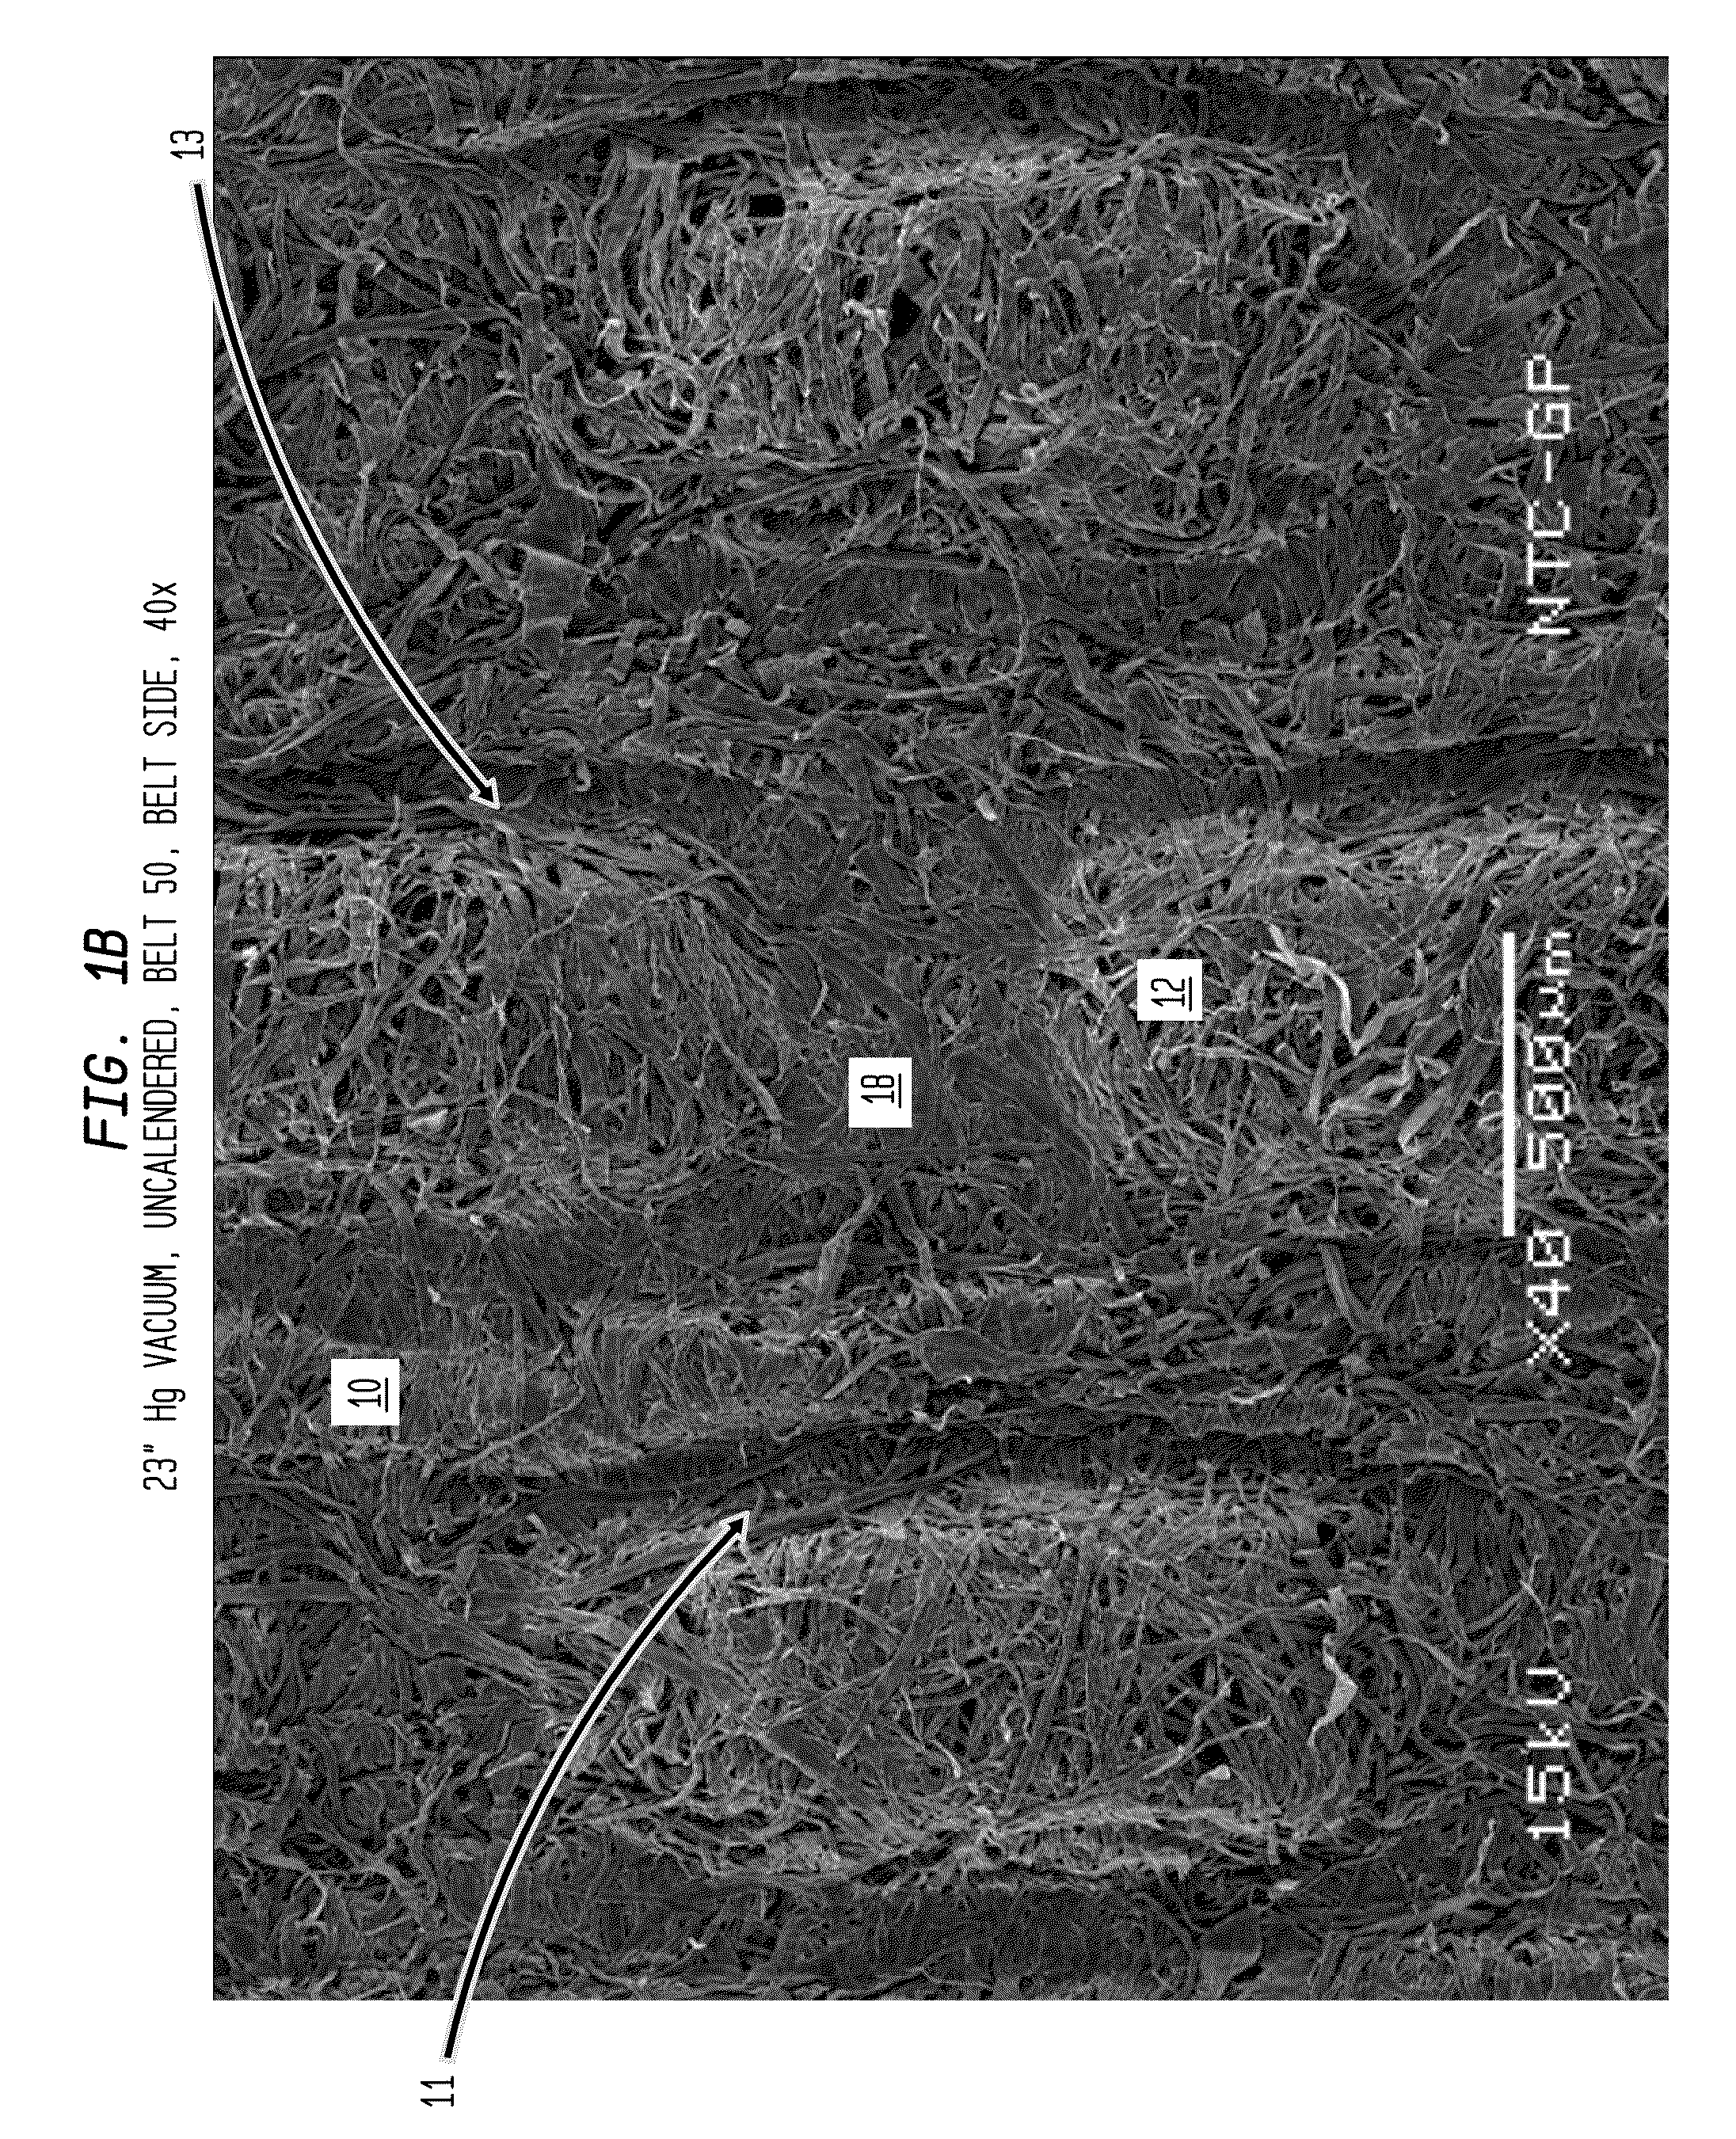 Belt-Creped, Variable Local Basis Weight Absorbent Sheet Prepared With Perforated Polymeric Belt